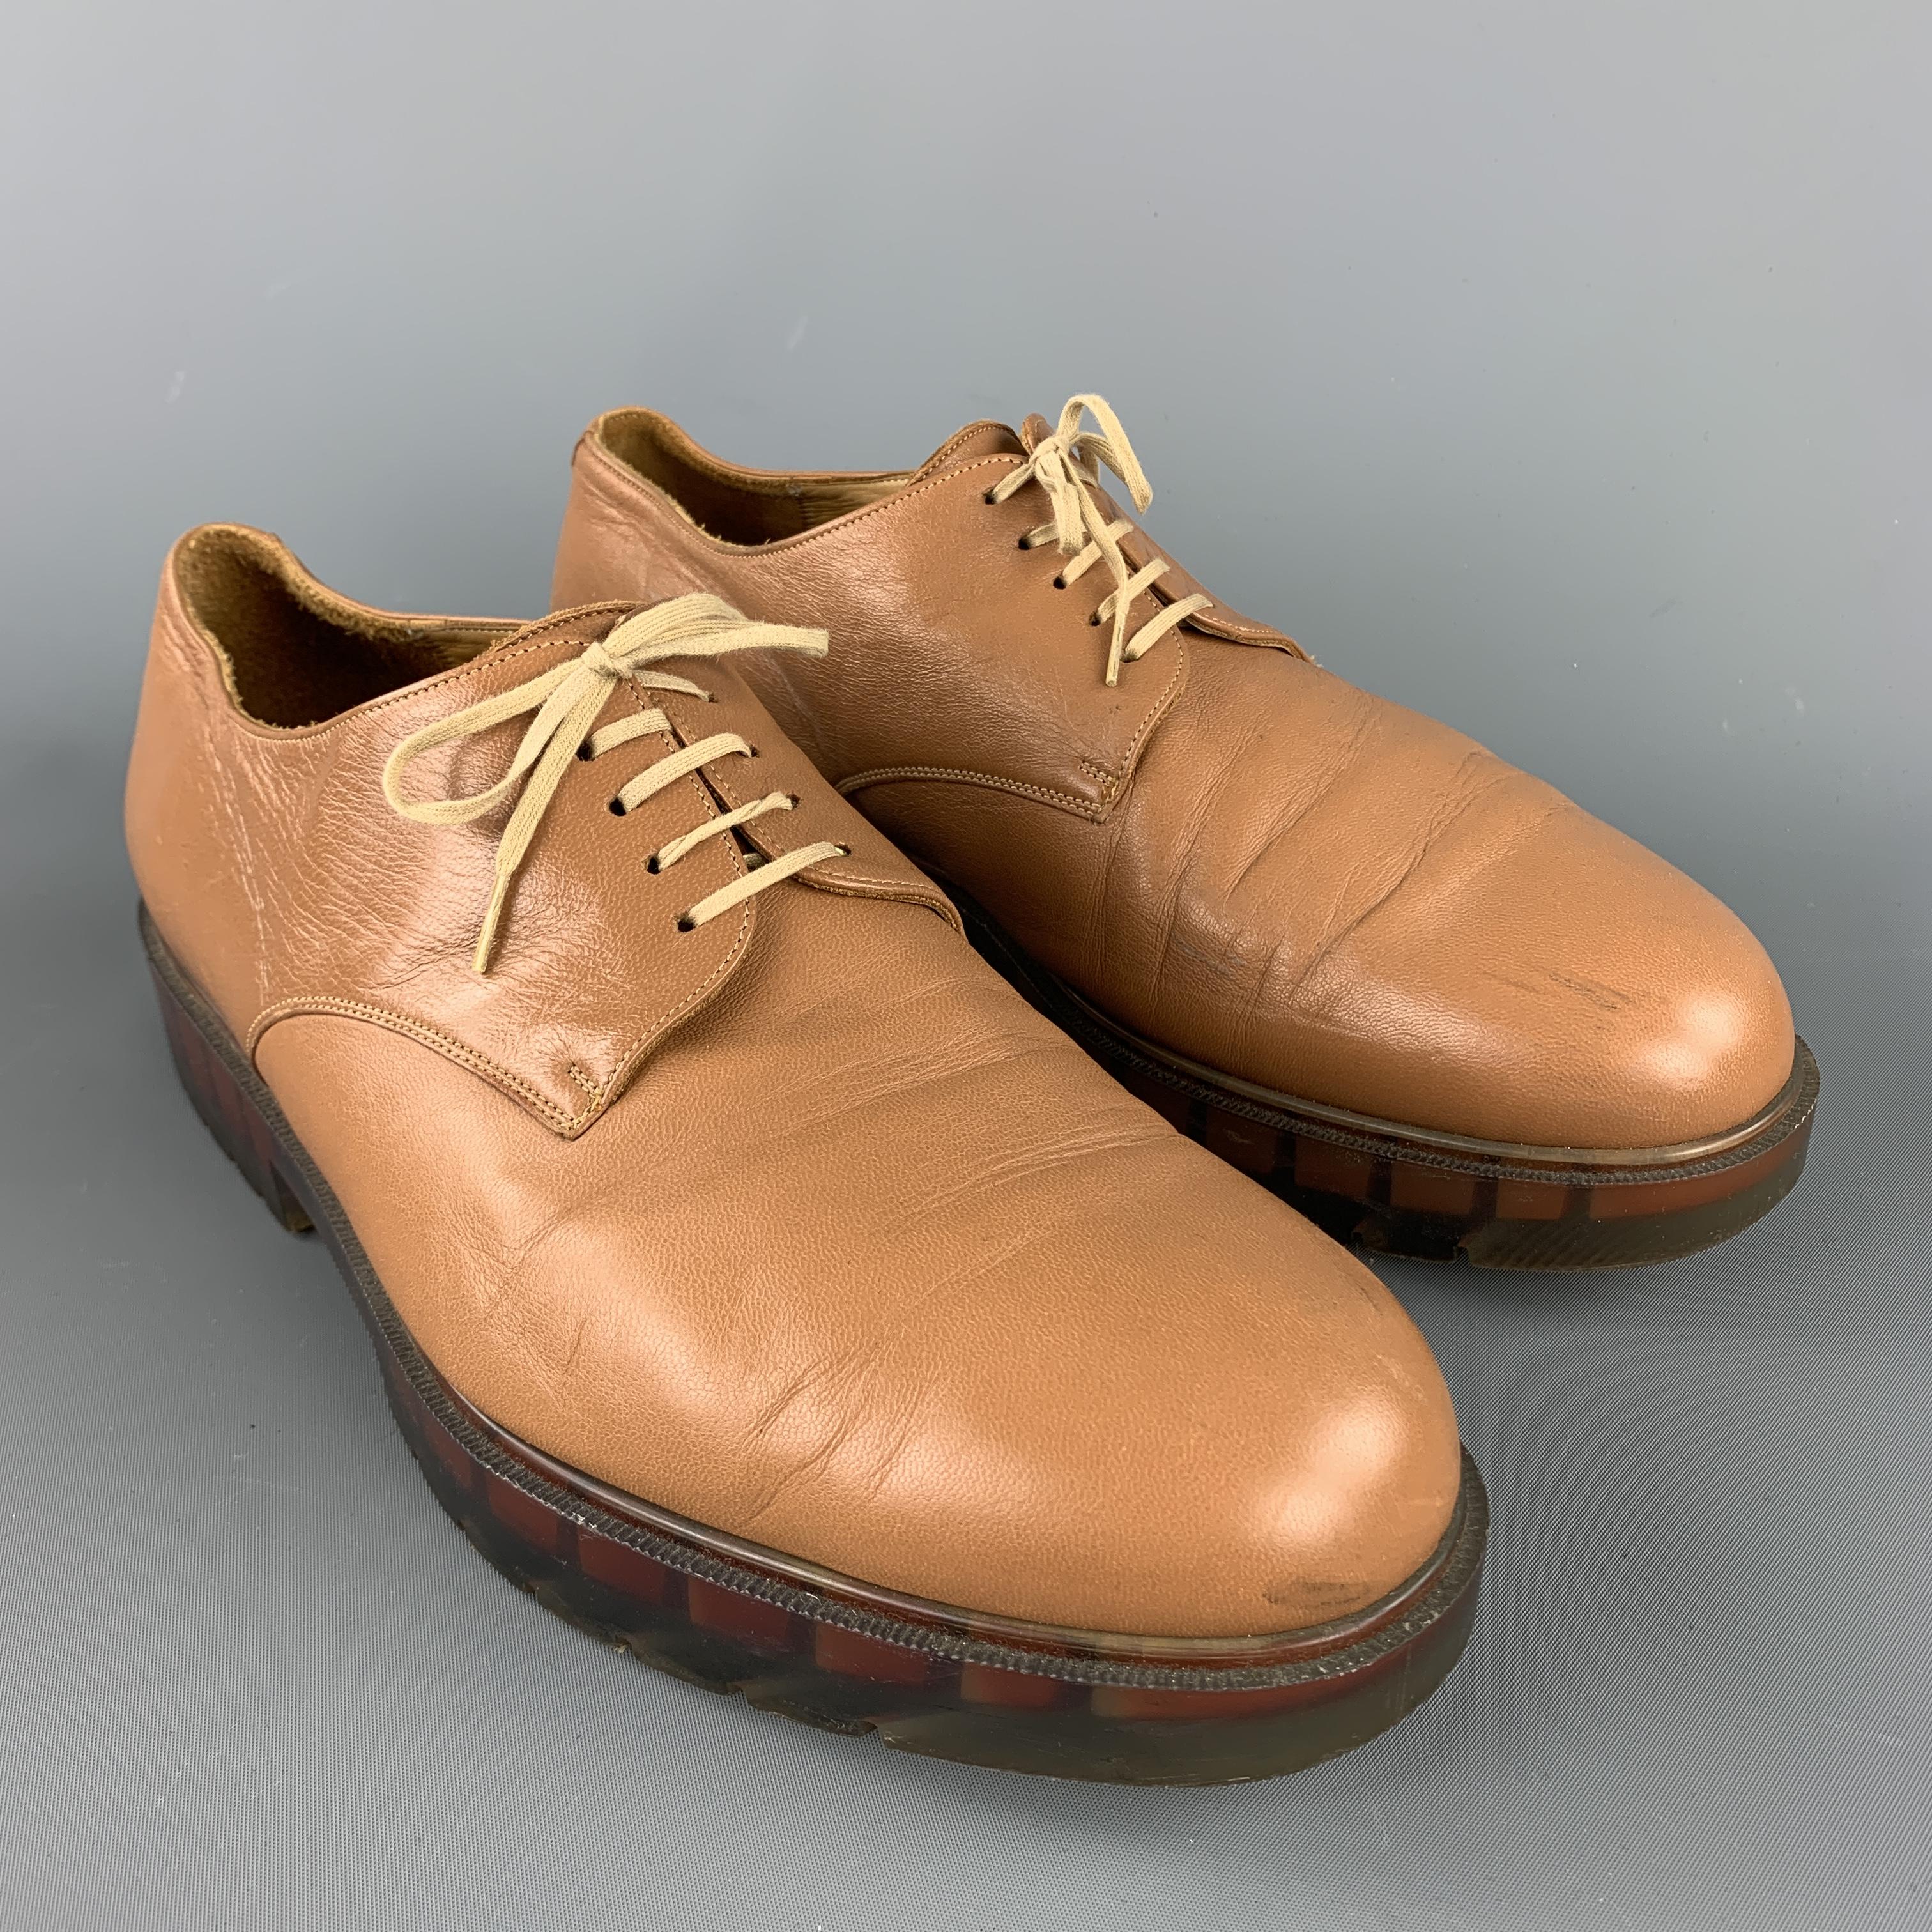 ROBERT CLERGERIE / OPENING CEREMONY lace up shoes comes in a solid tan leather material, with a contrast lace and a transparent rubber sole. Made in France.

Very Good Pre-Owned Condition.
Marked: US 11

Outsole: 12 x 4.2 in. 